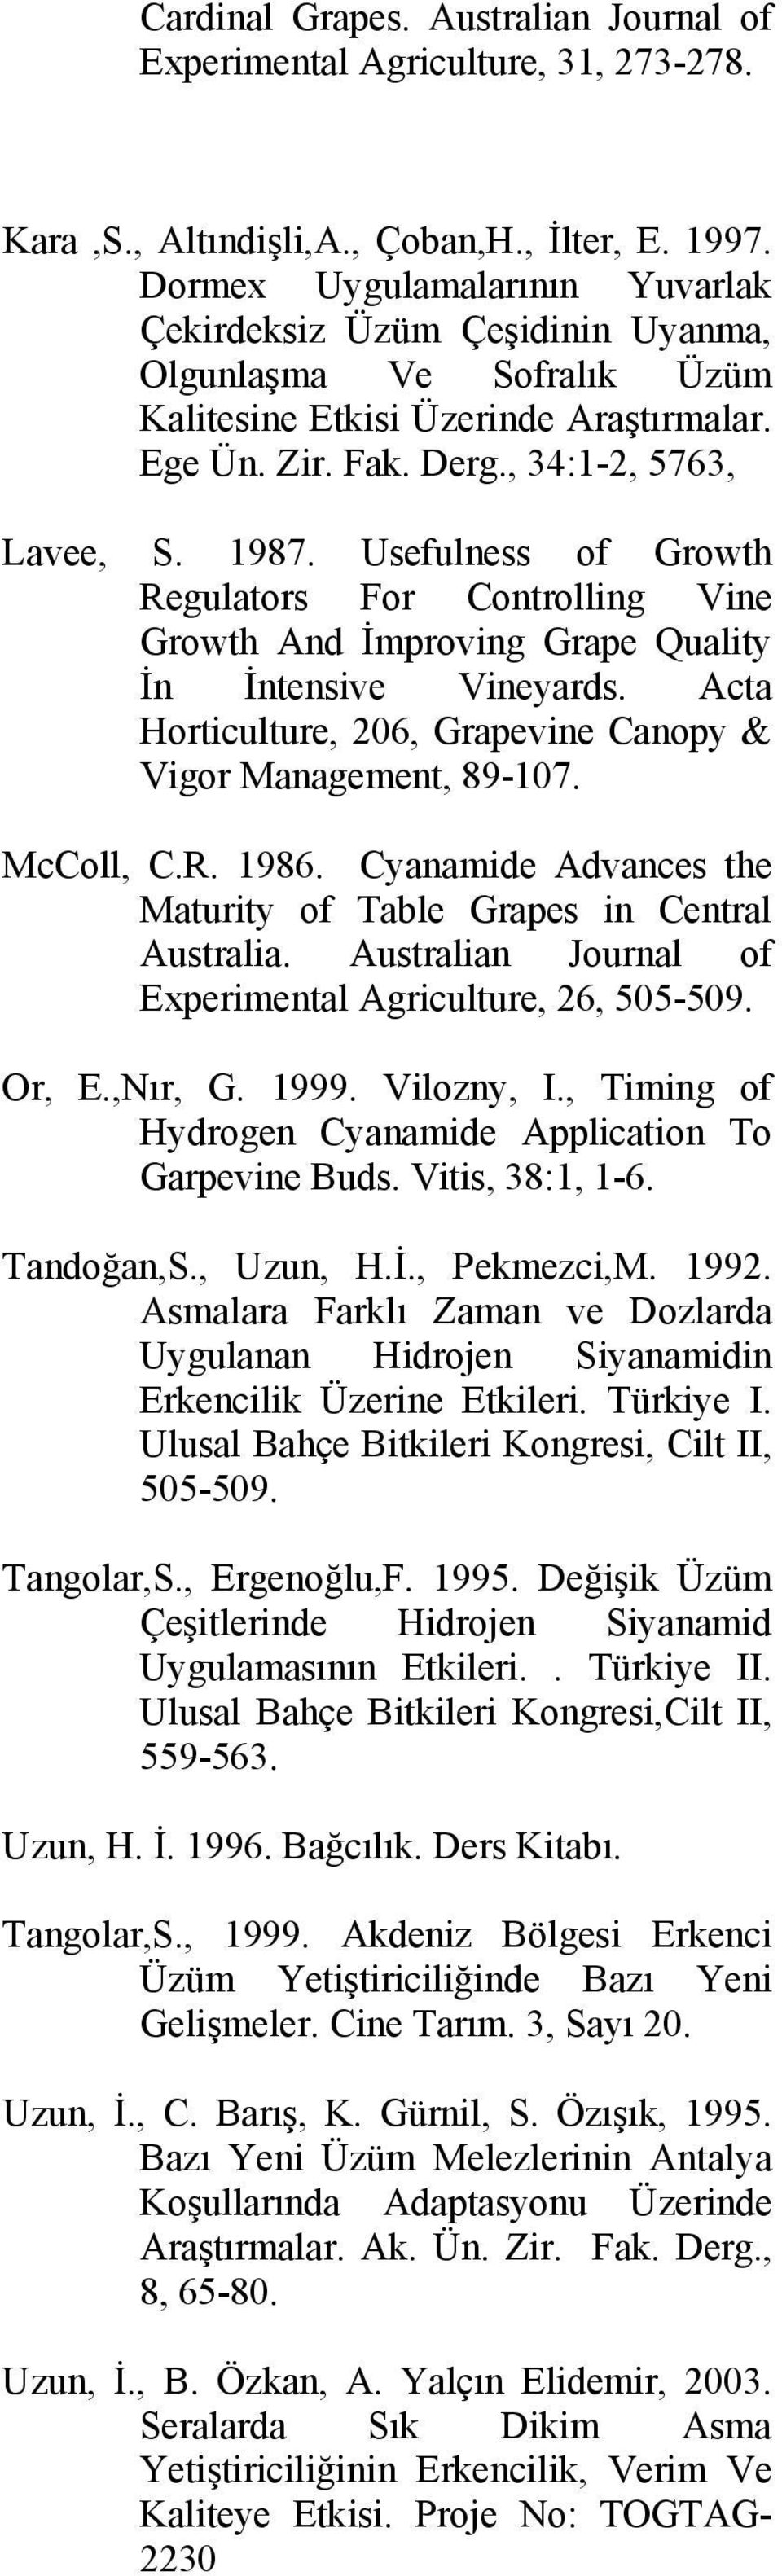 Usefulness of Growth Regulators For Controlling Vine Growth And İmproving Grape Quality İn İntensive Vineyards. Acta Horticulture, 206, Grapevine Canopy & Vigor Management, 89-107. McColl, C.R. 1986.